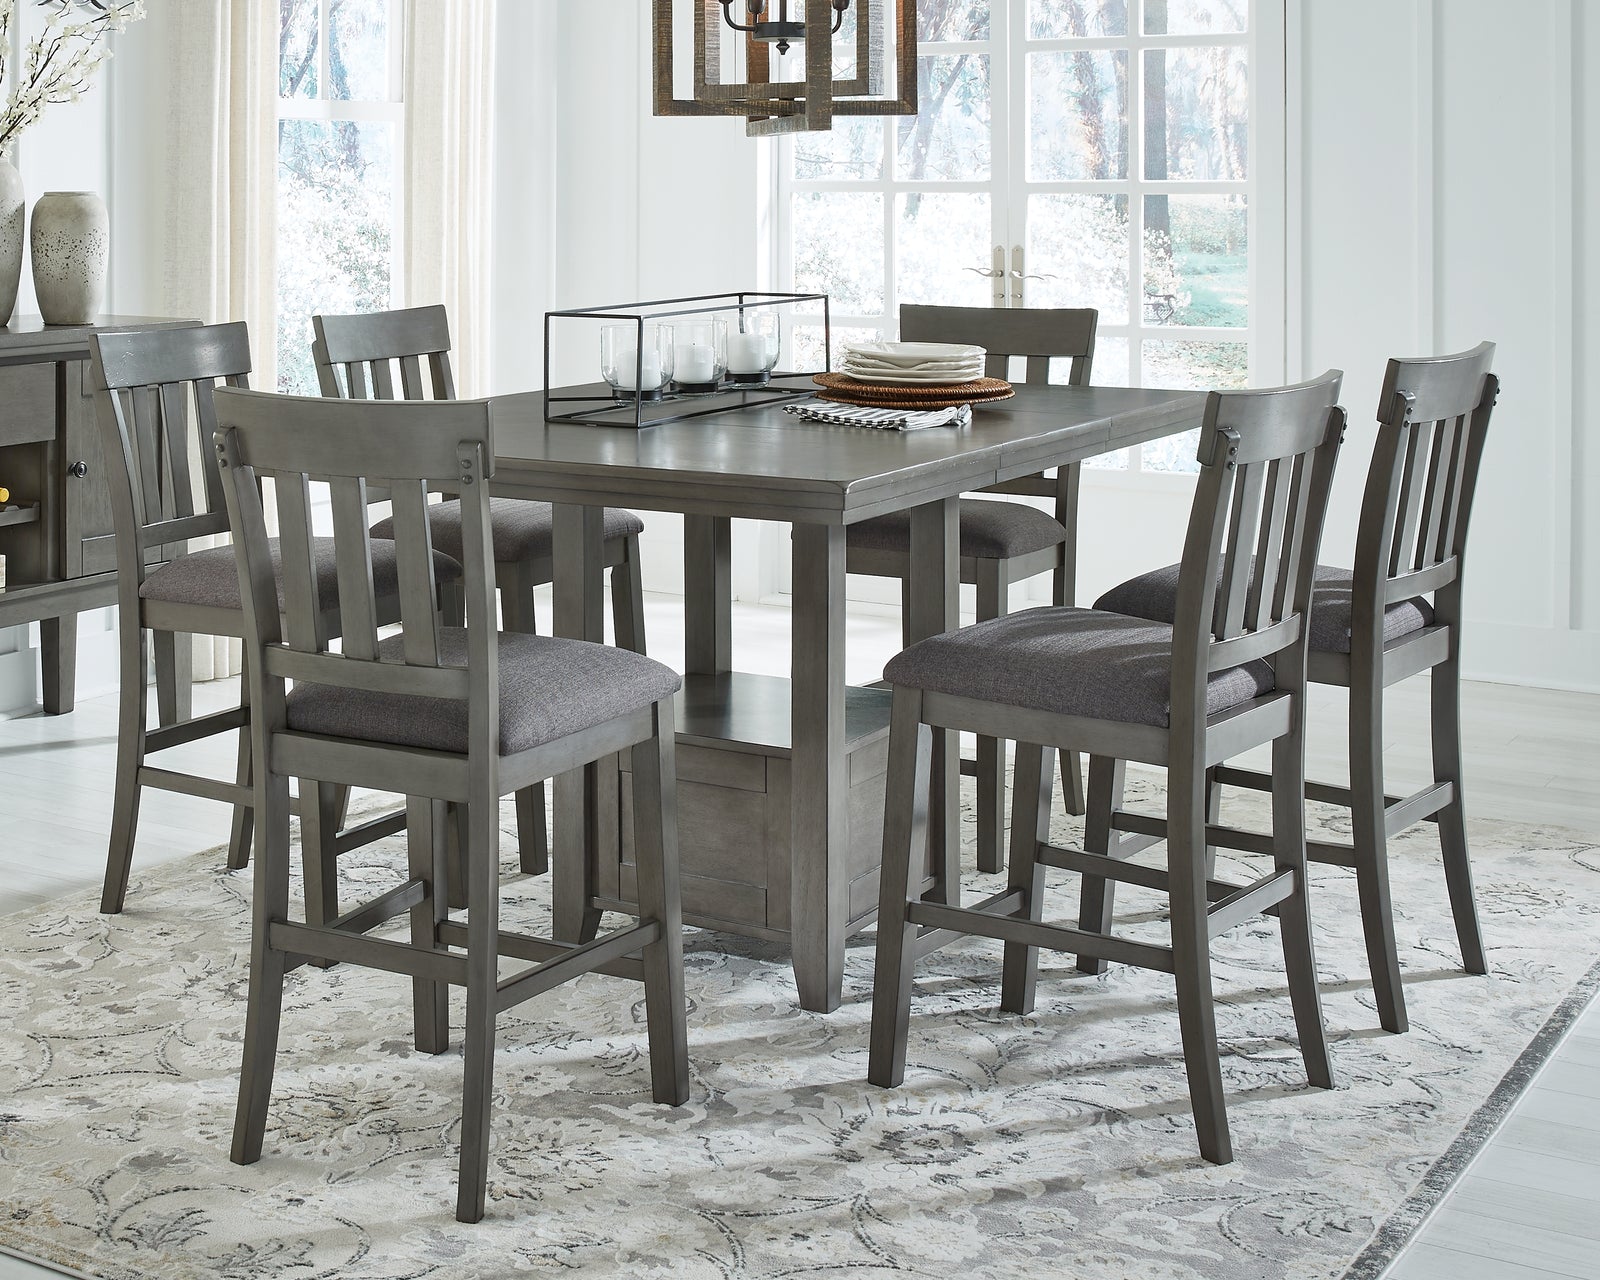 Hallanden Gray Counter Height Dining Table And 6 Barstools With Storage